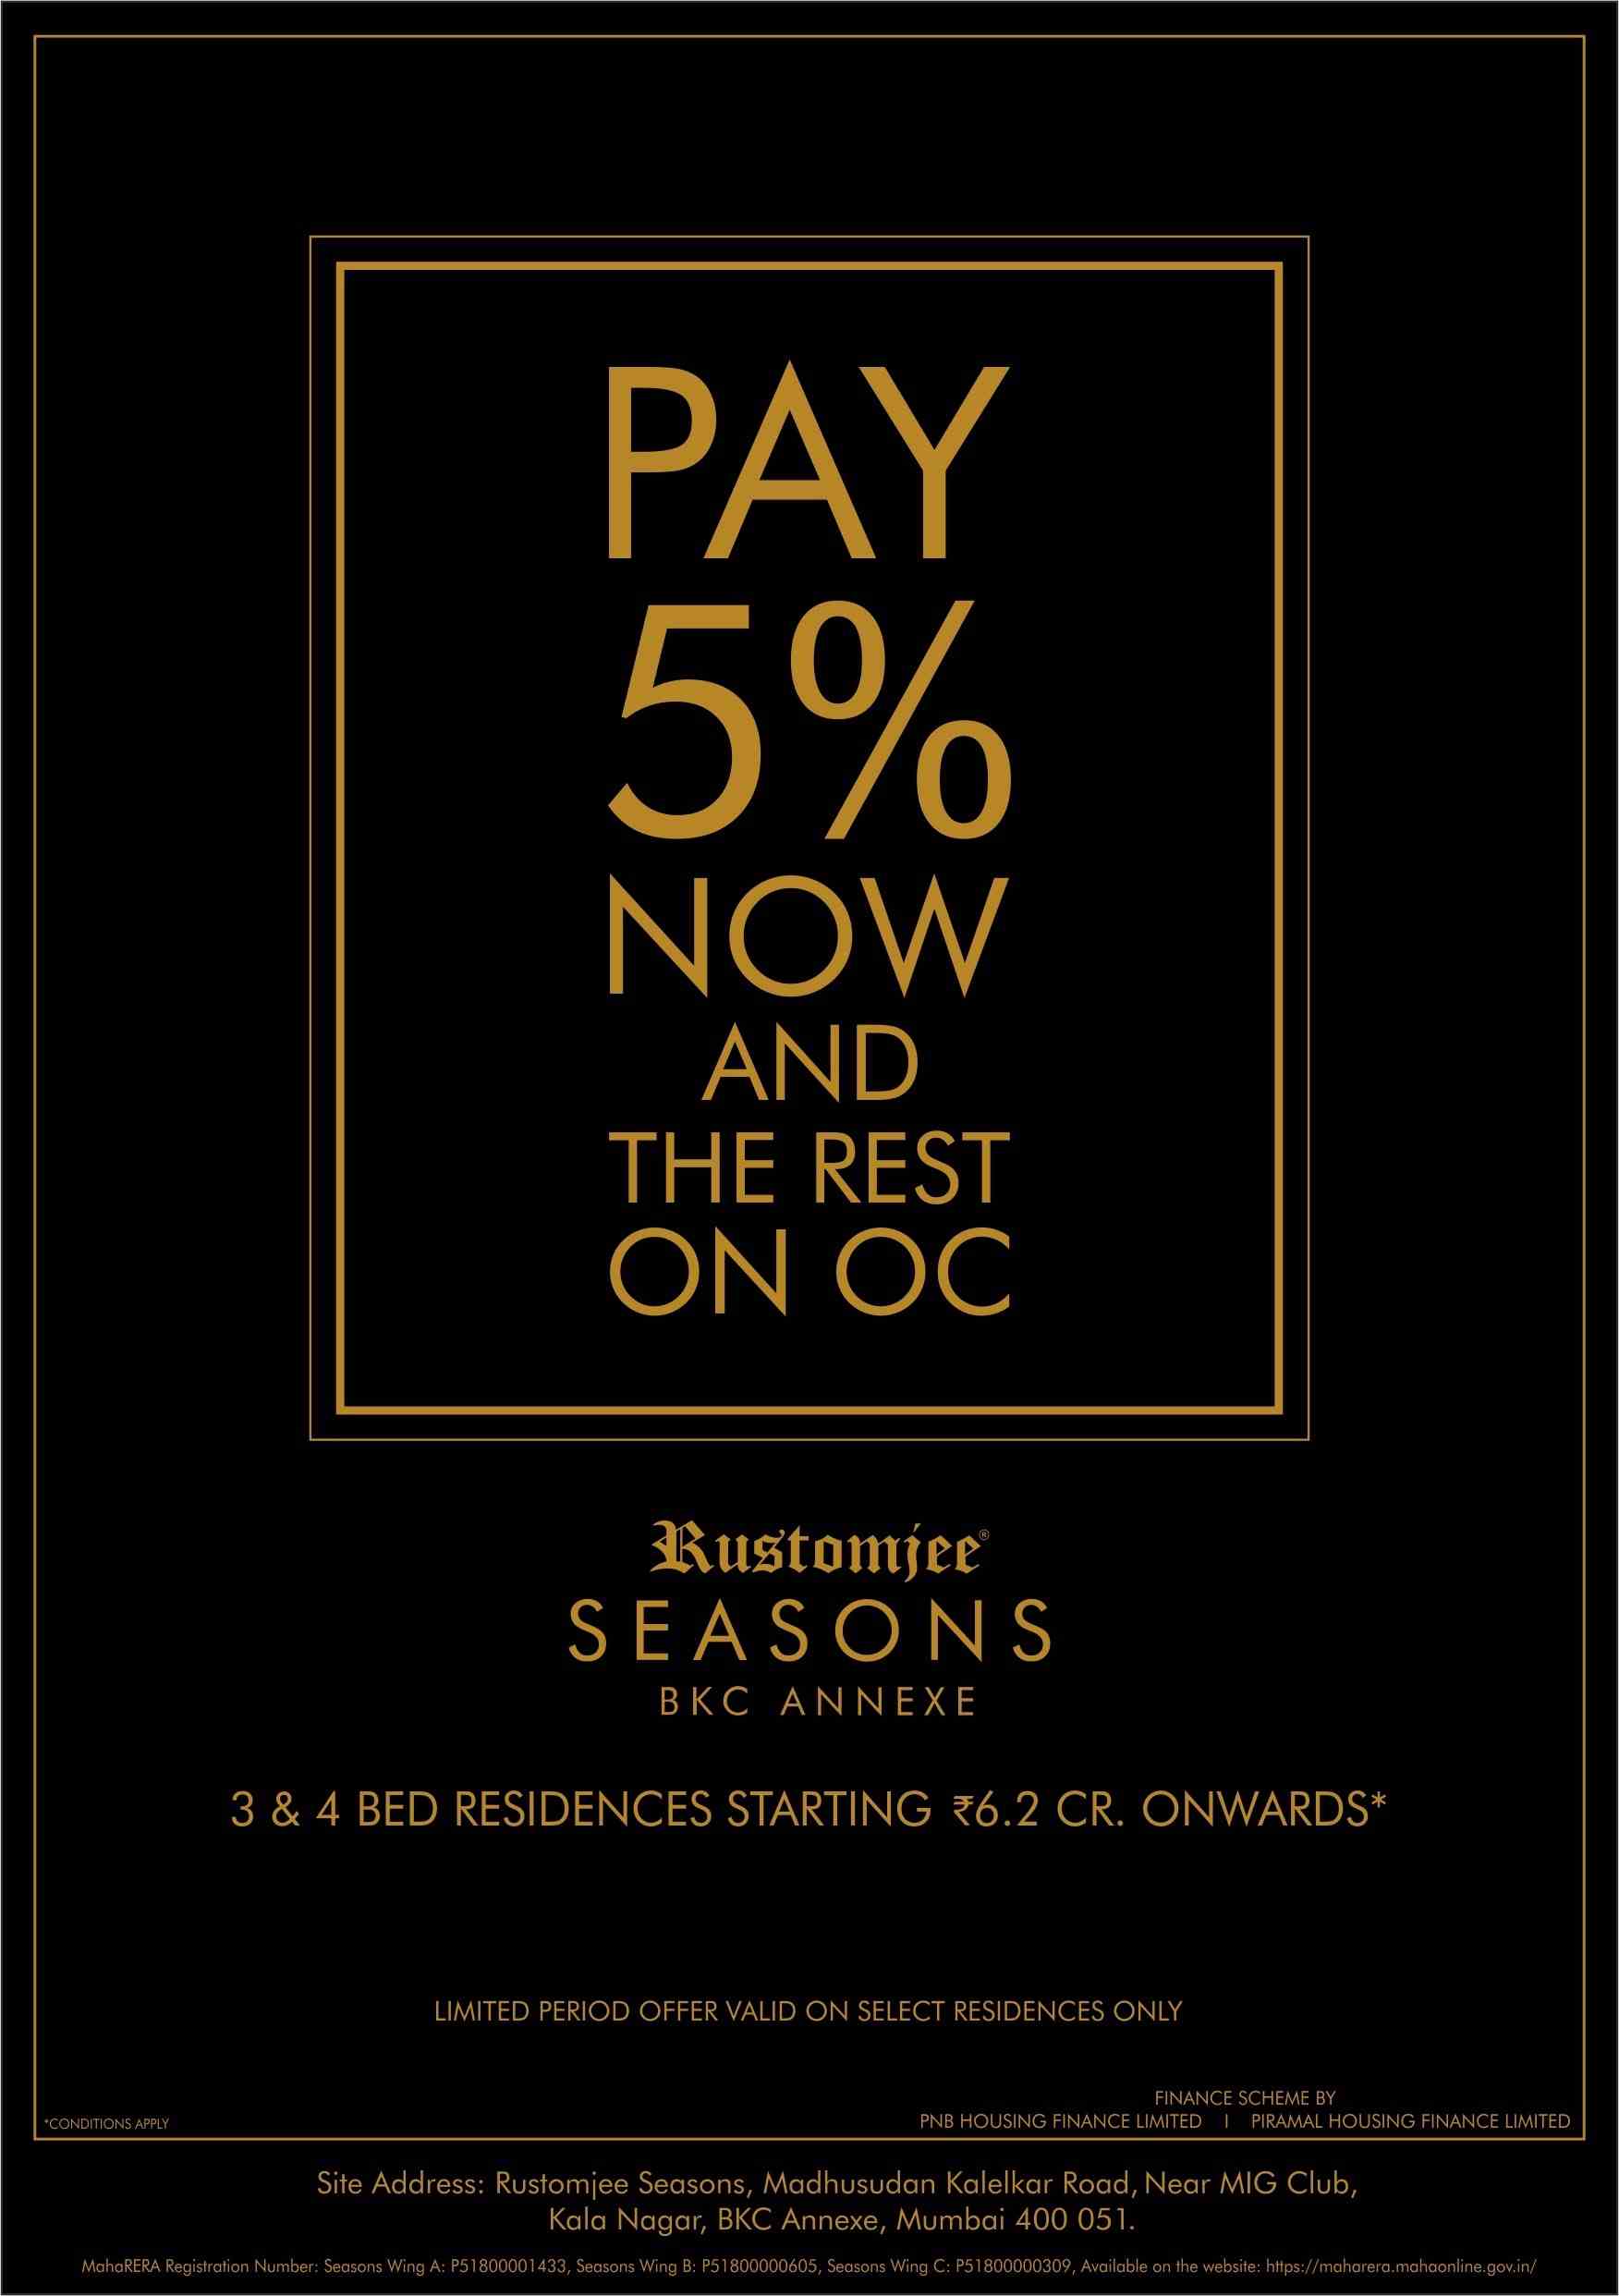 Pay 5% now and the rest on OC at Rustomjee Seasons in Mumbai Update